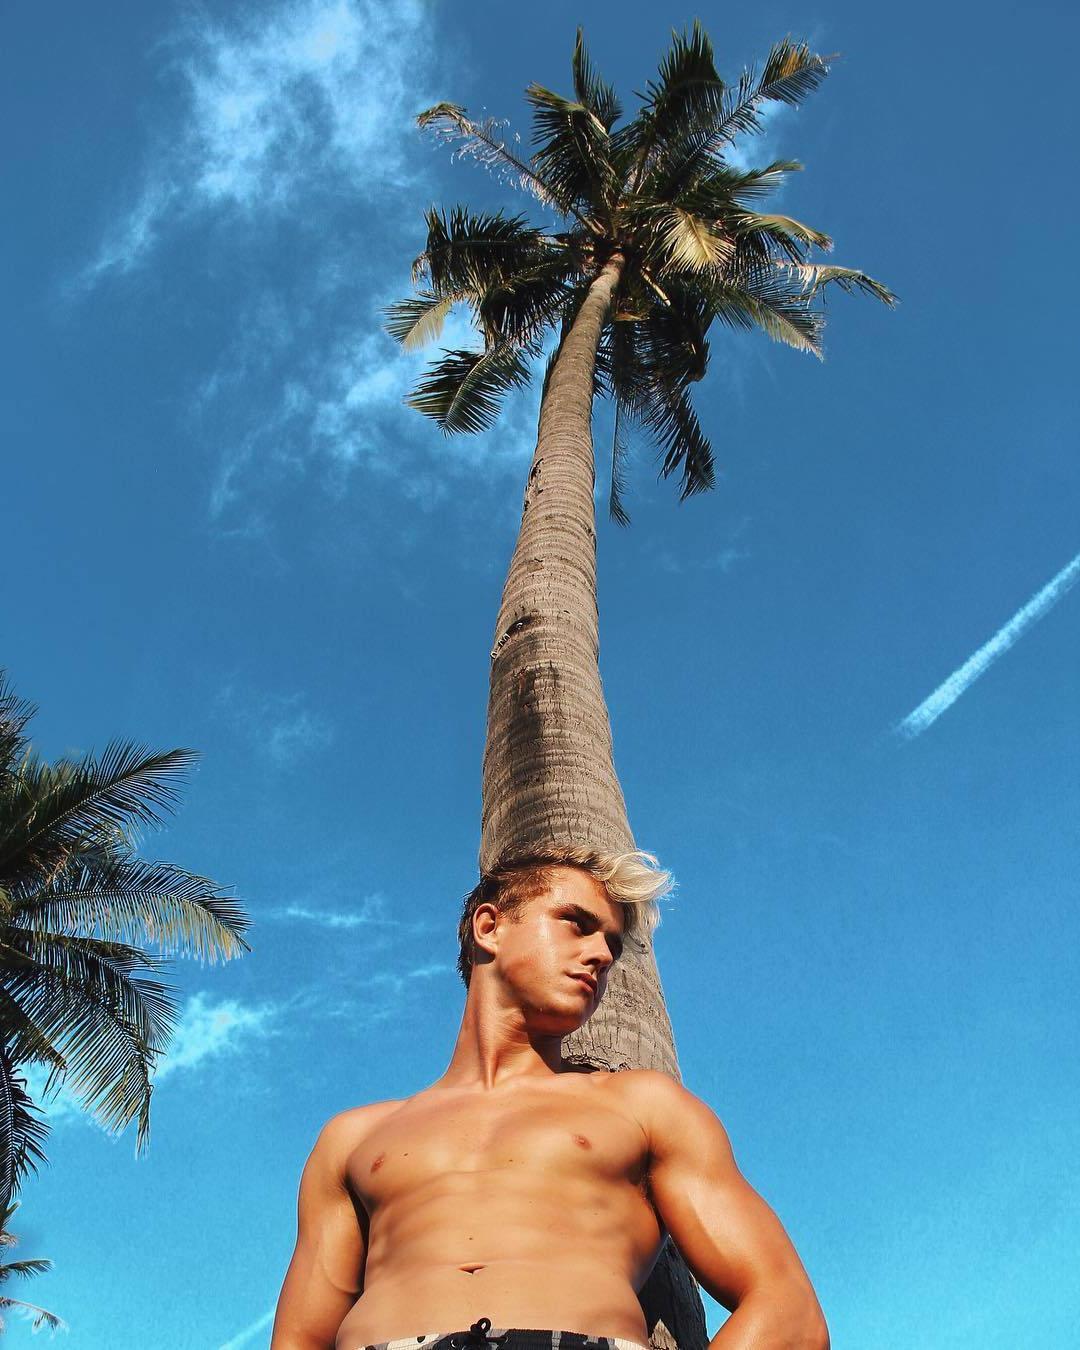 cute-slim-fit-bare-chest-blond-twink-palm-tree